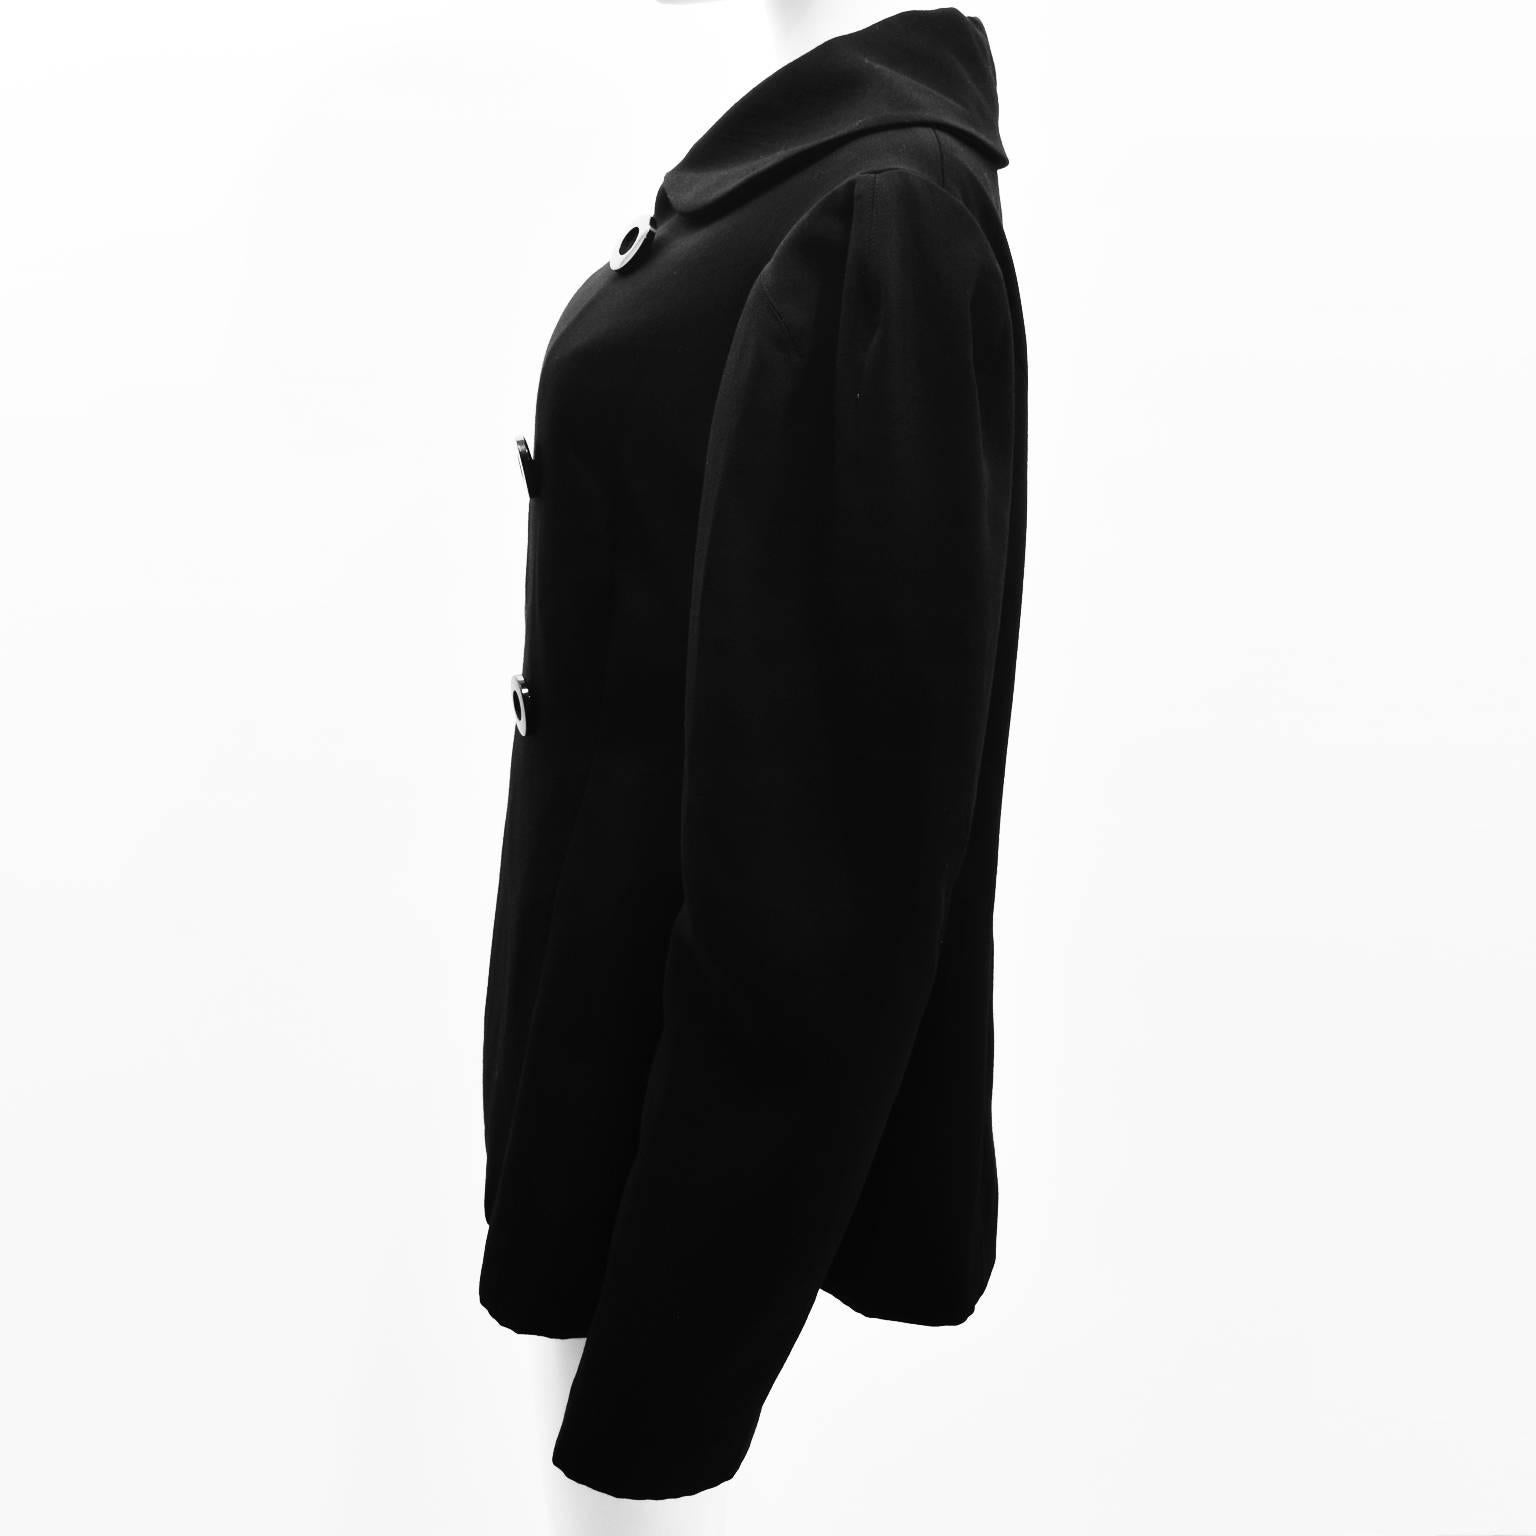 Yohji Yamamoto Black Double Breasted Jacket with Round Collar Oversized Sleeves In Good Condition For Sale In London, GB